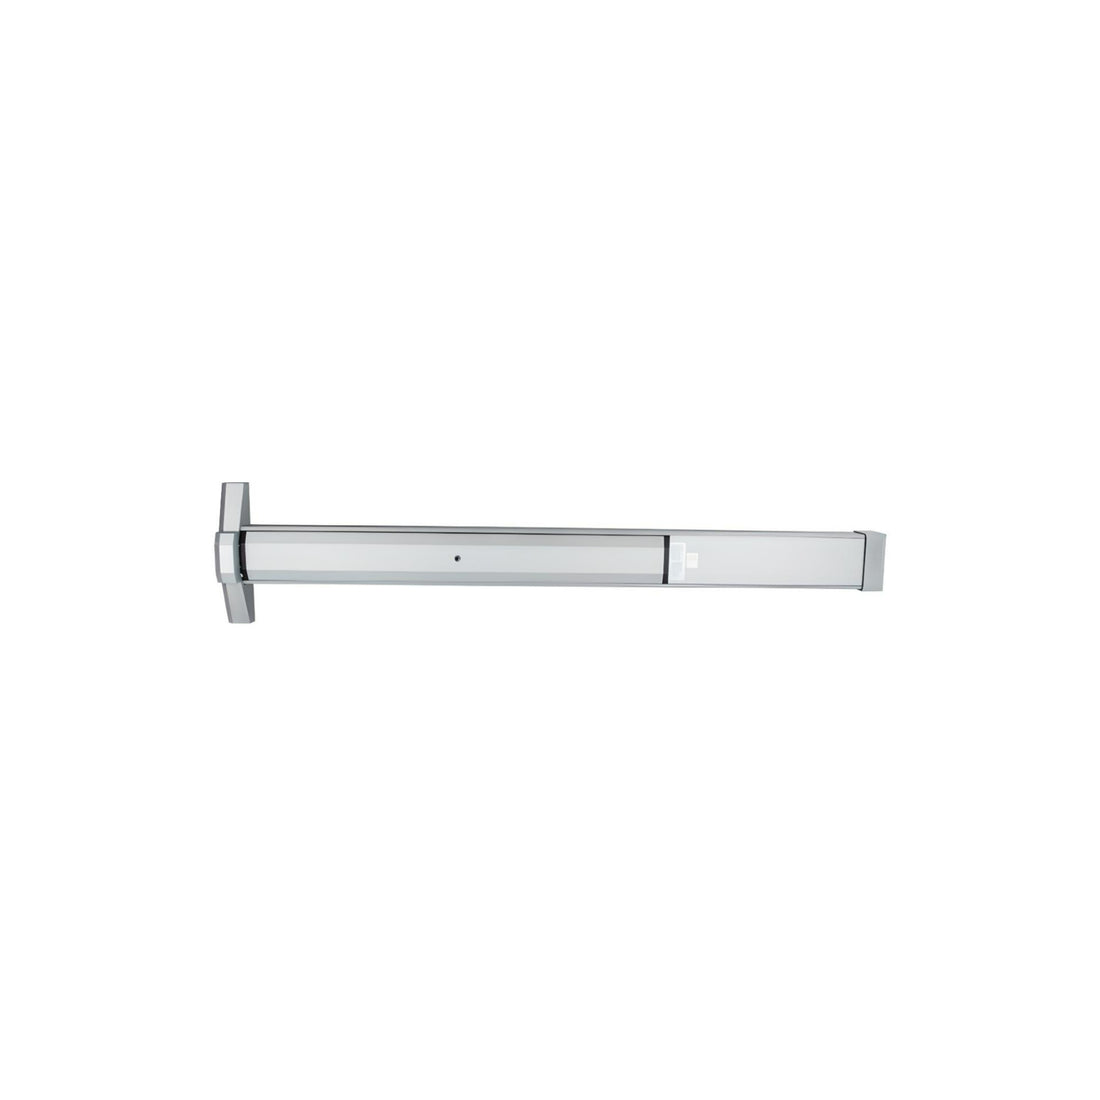 STED Series Grade 2 Storefront 48 in Concealed Vertical Rod Narrow Stile Panic Exit Device w/ Mortise Cylinder